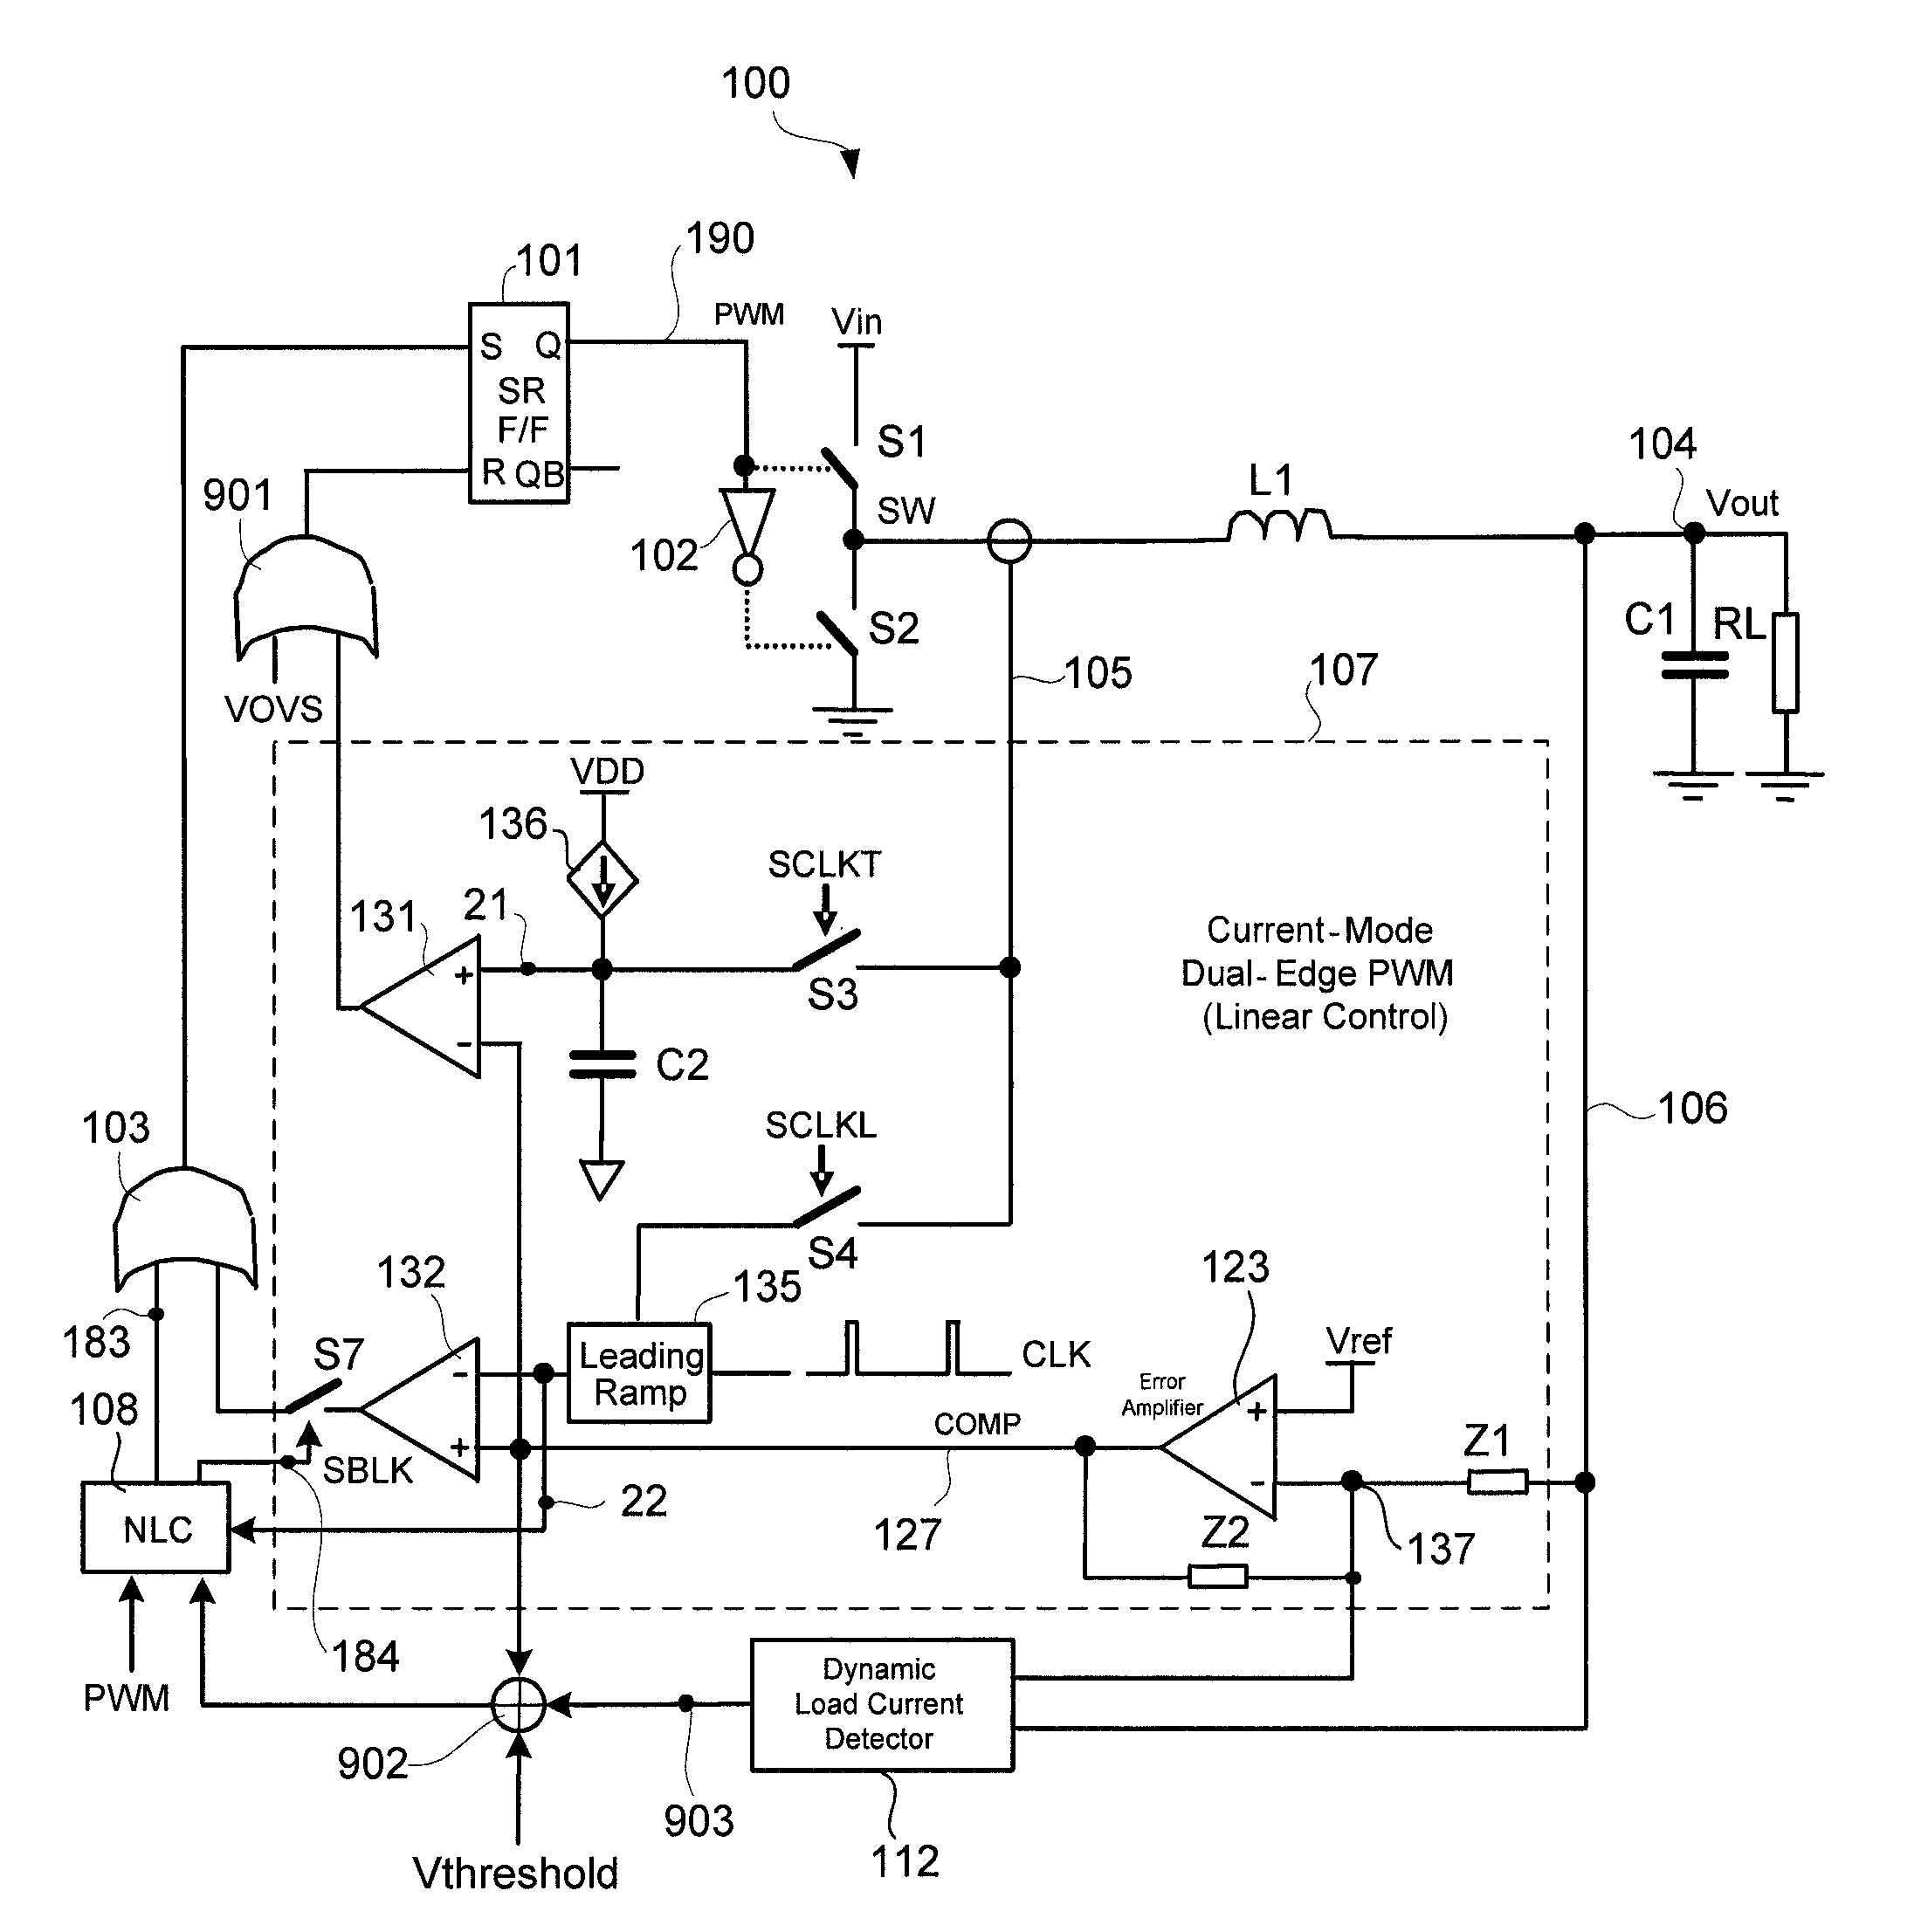 Voltage regulator with current-mode dual-edge pulse width modulation and non-linear control